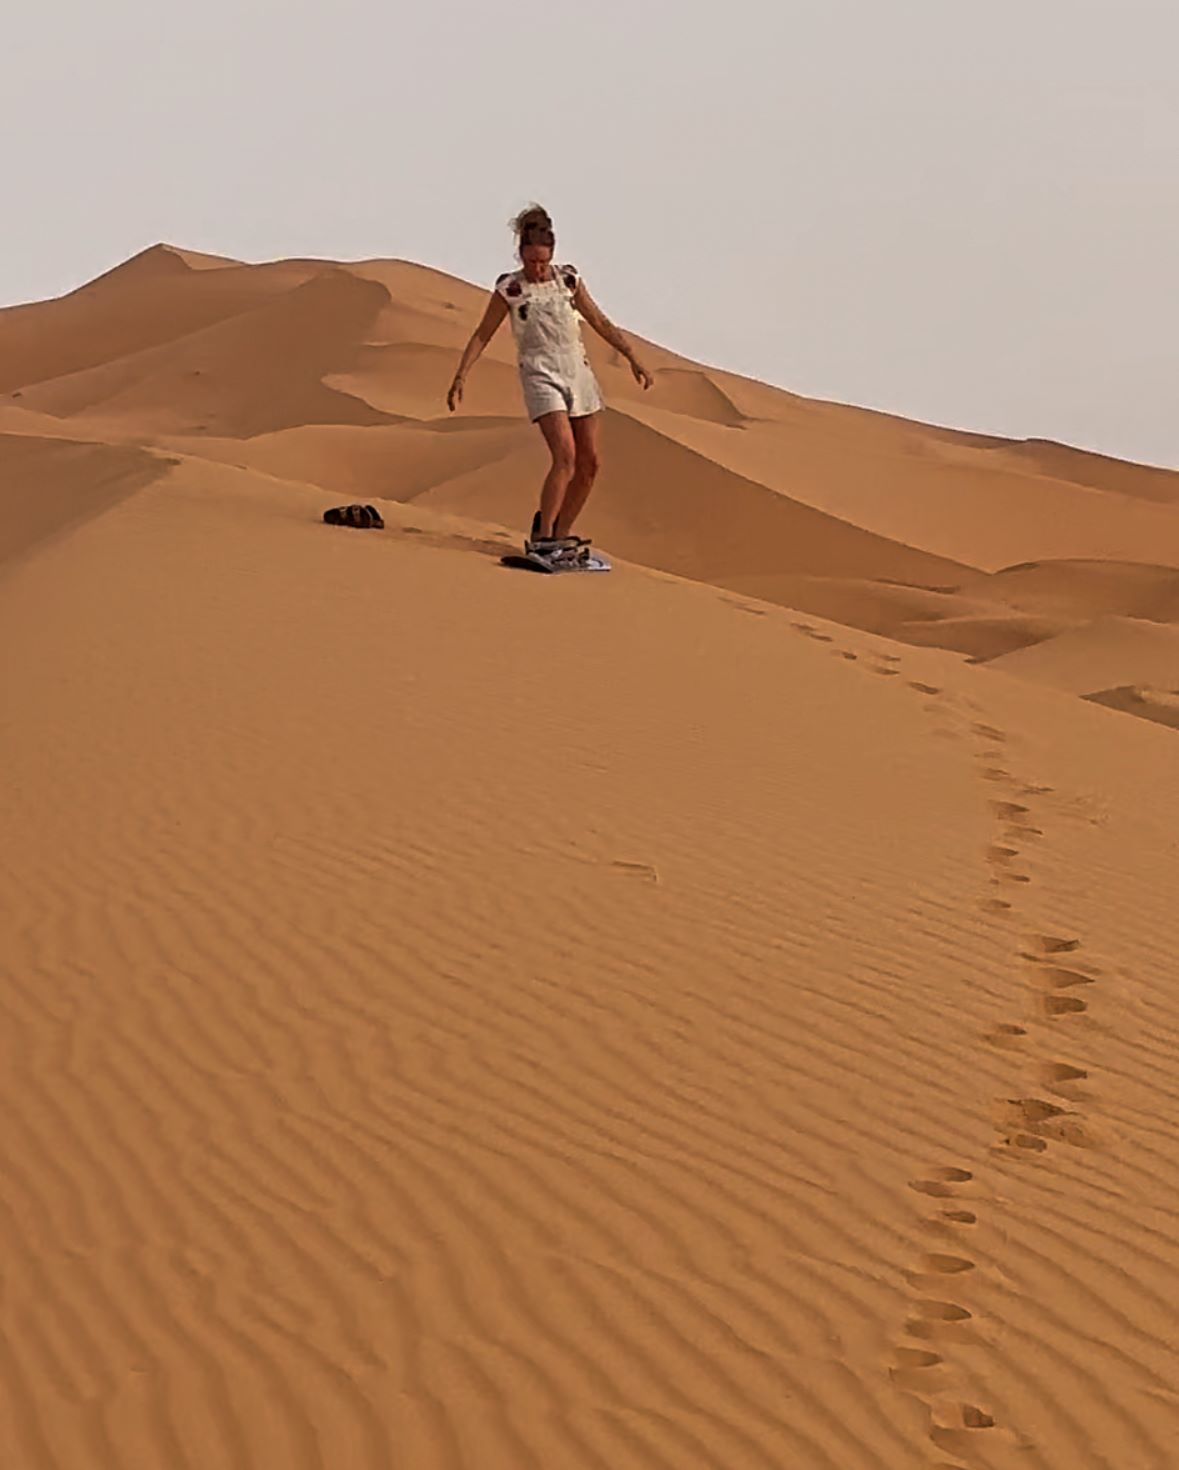 An image of a woman sand surfing in the Moroccan Sahara after her camel ride.